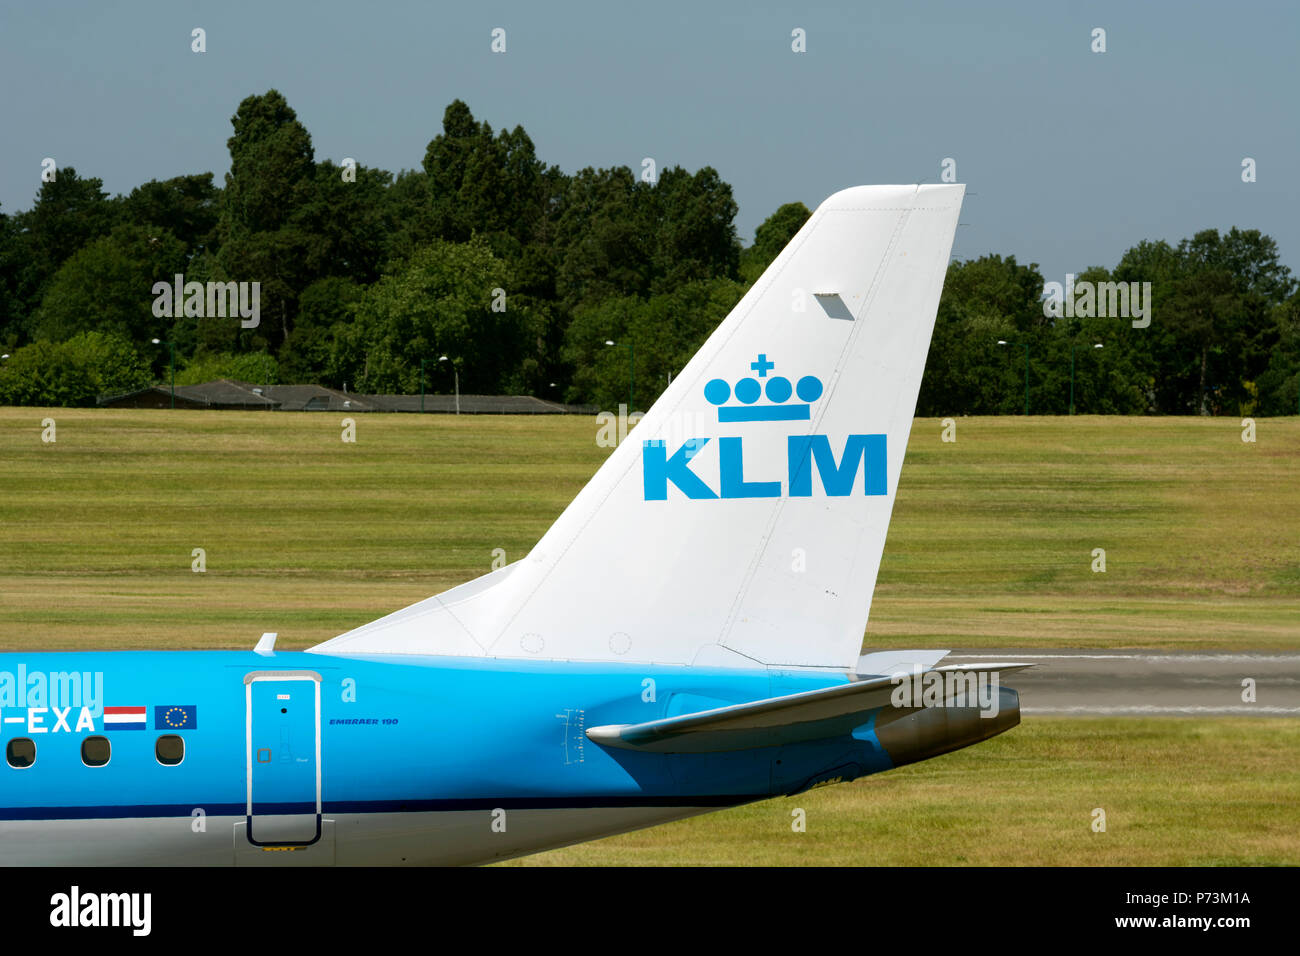 Klm Aircraft Tail High Resolution Stock Photography and Images - Alamy